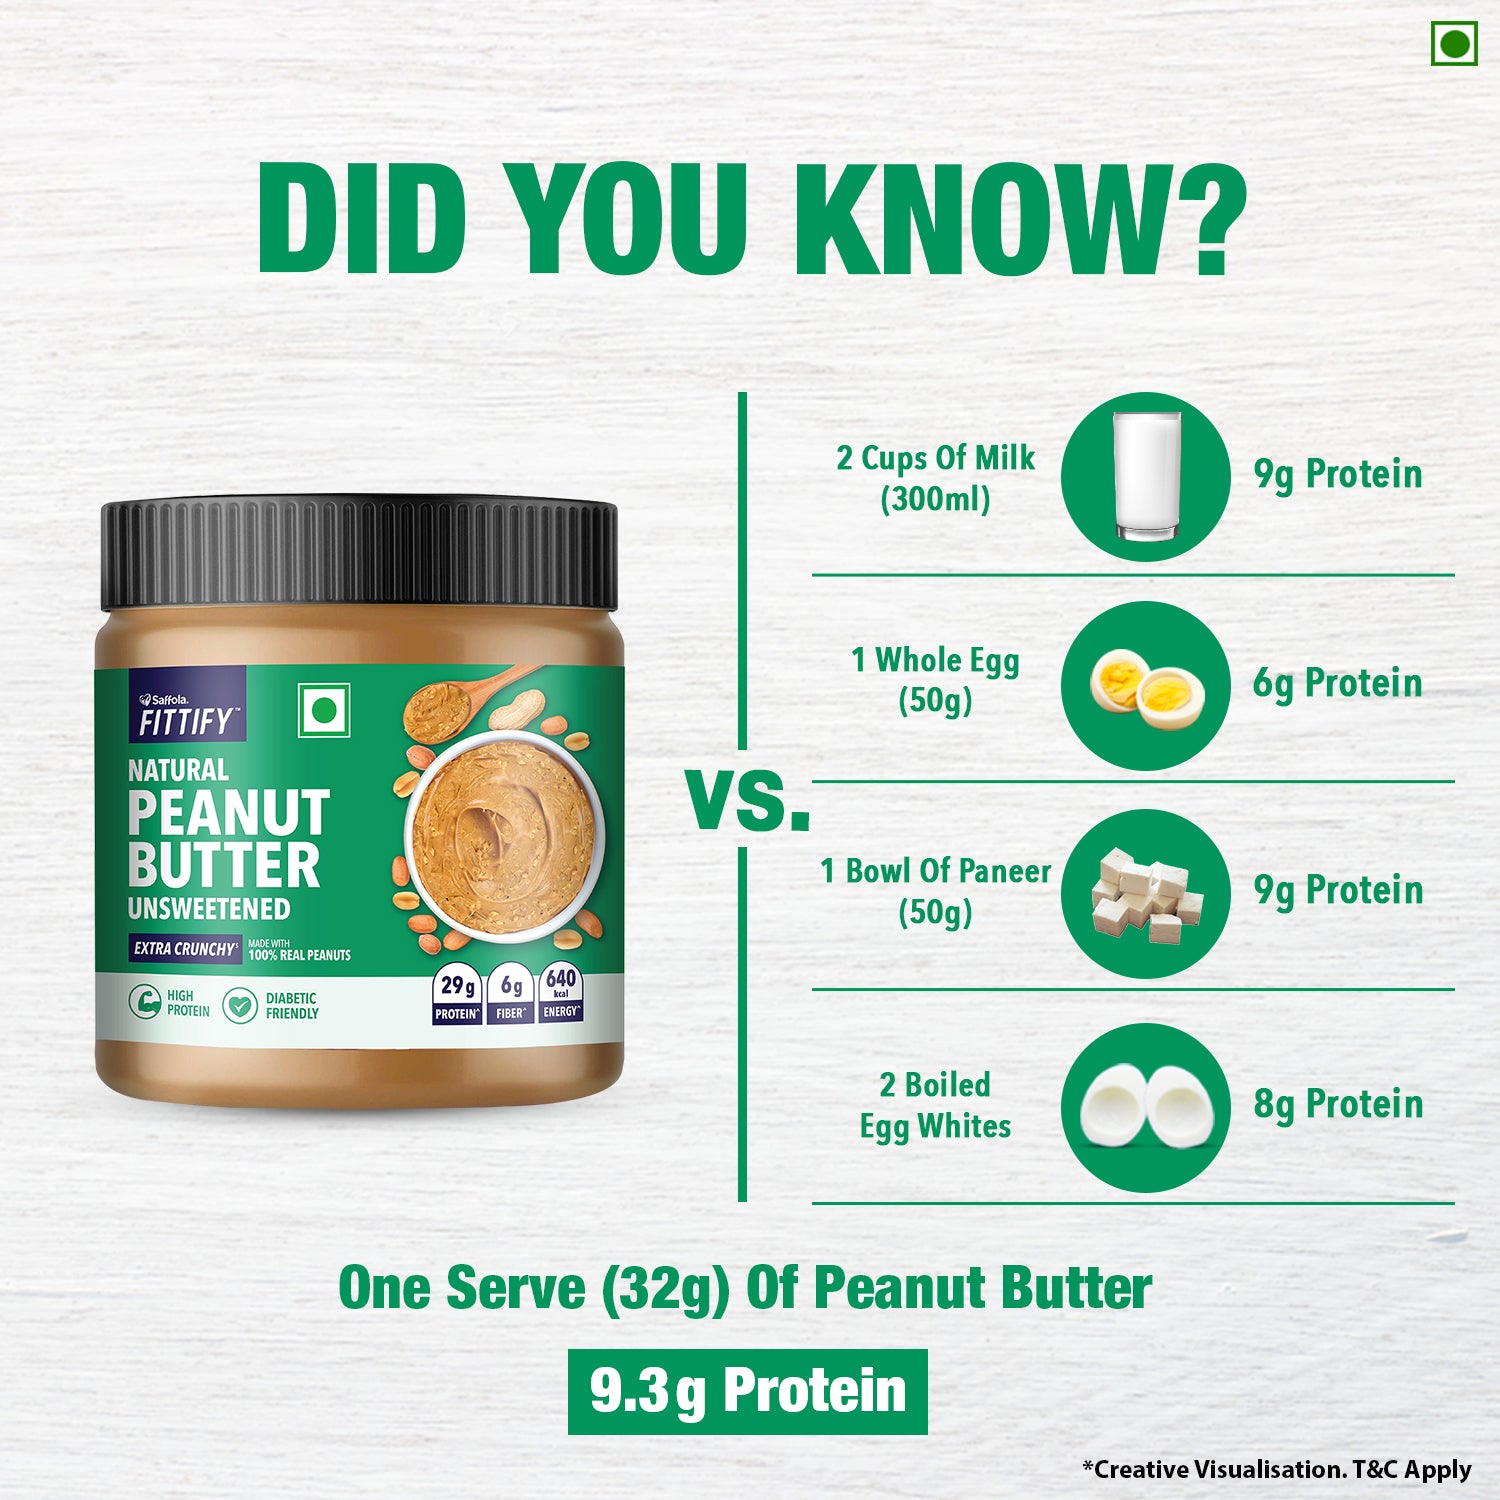 पनट बटर क फयद उपयग और नकसन  Peanut Butter Benefits Uses and Side  Effects in Hindi